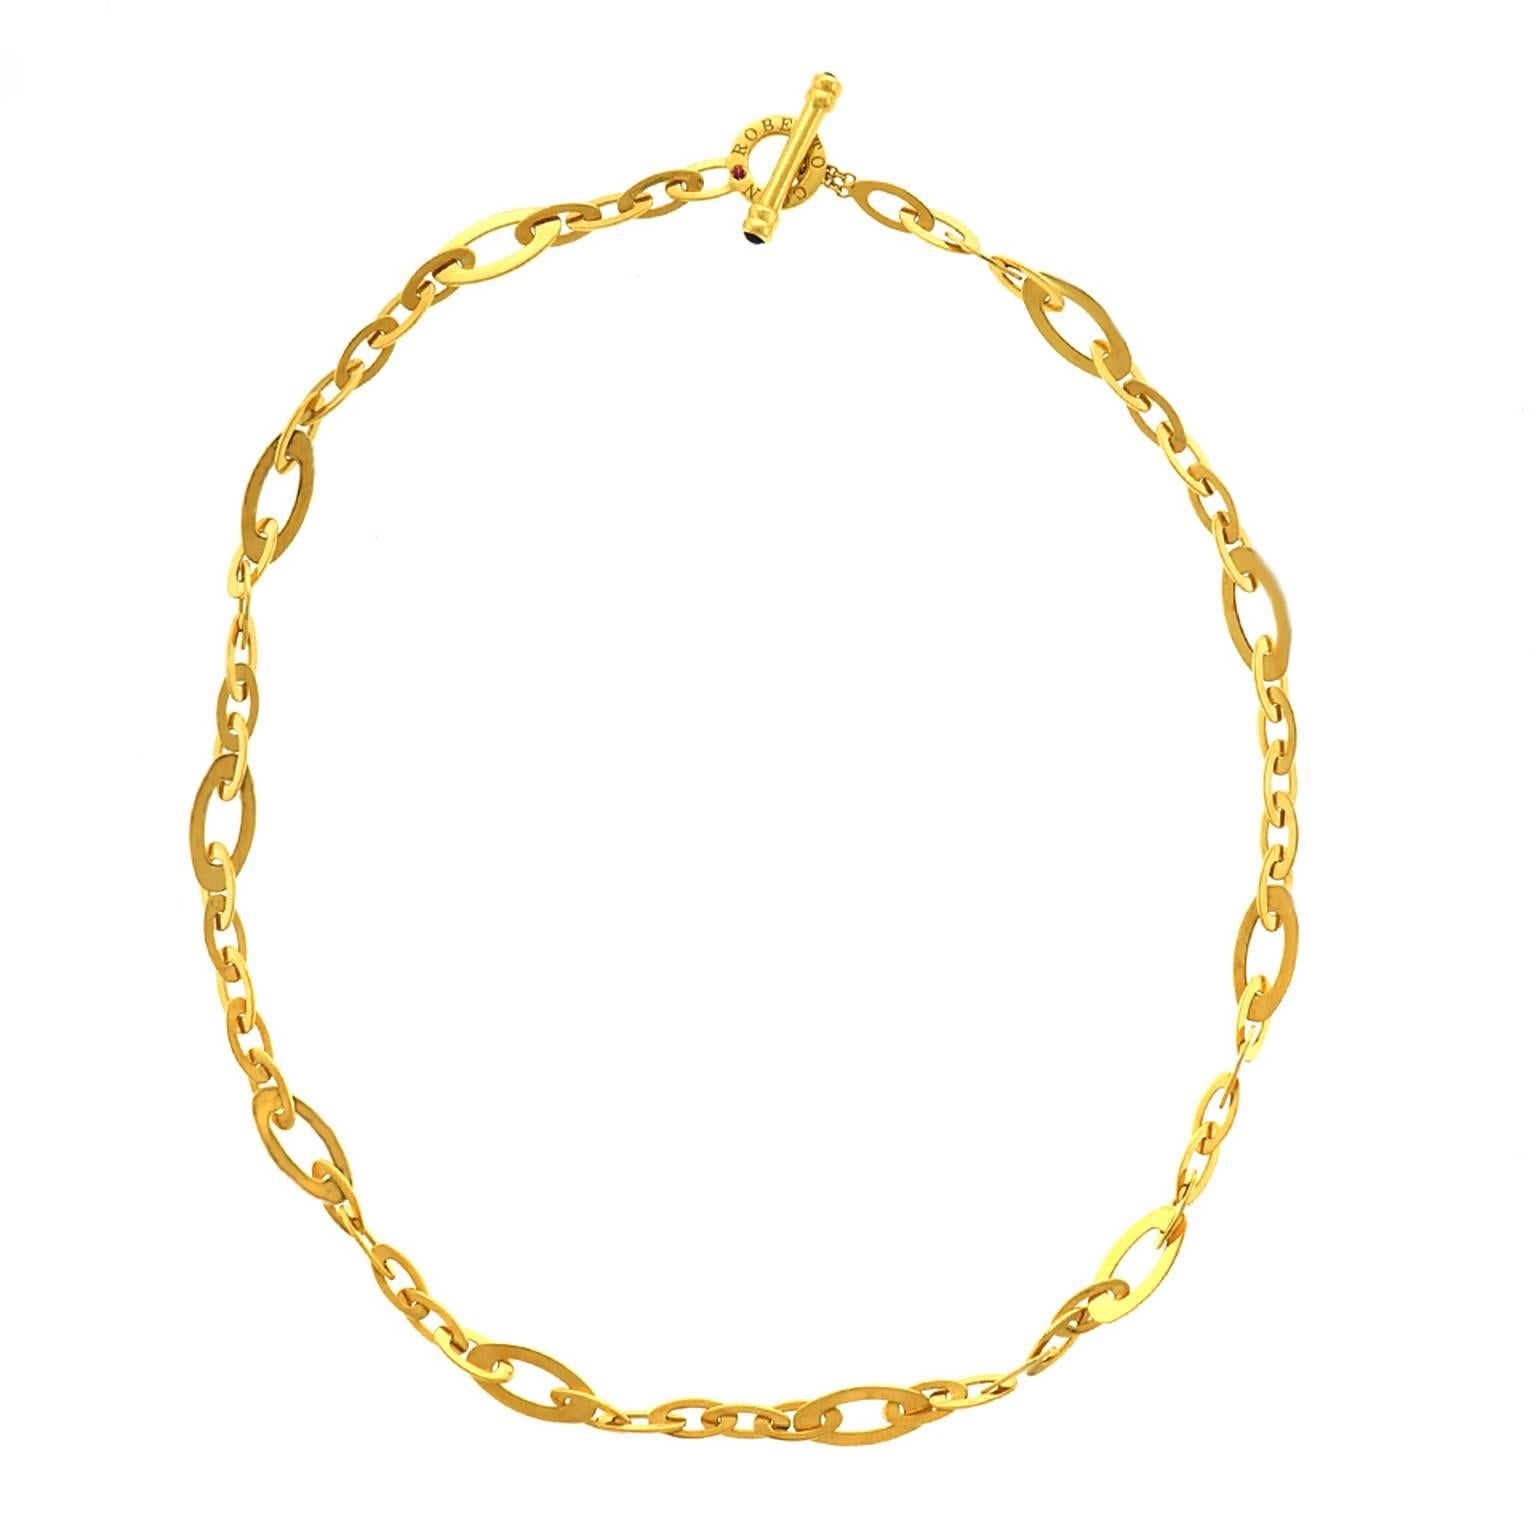 Roberto Coin “Chic & Shine” Gold Necklace 3